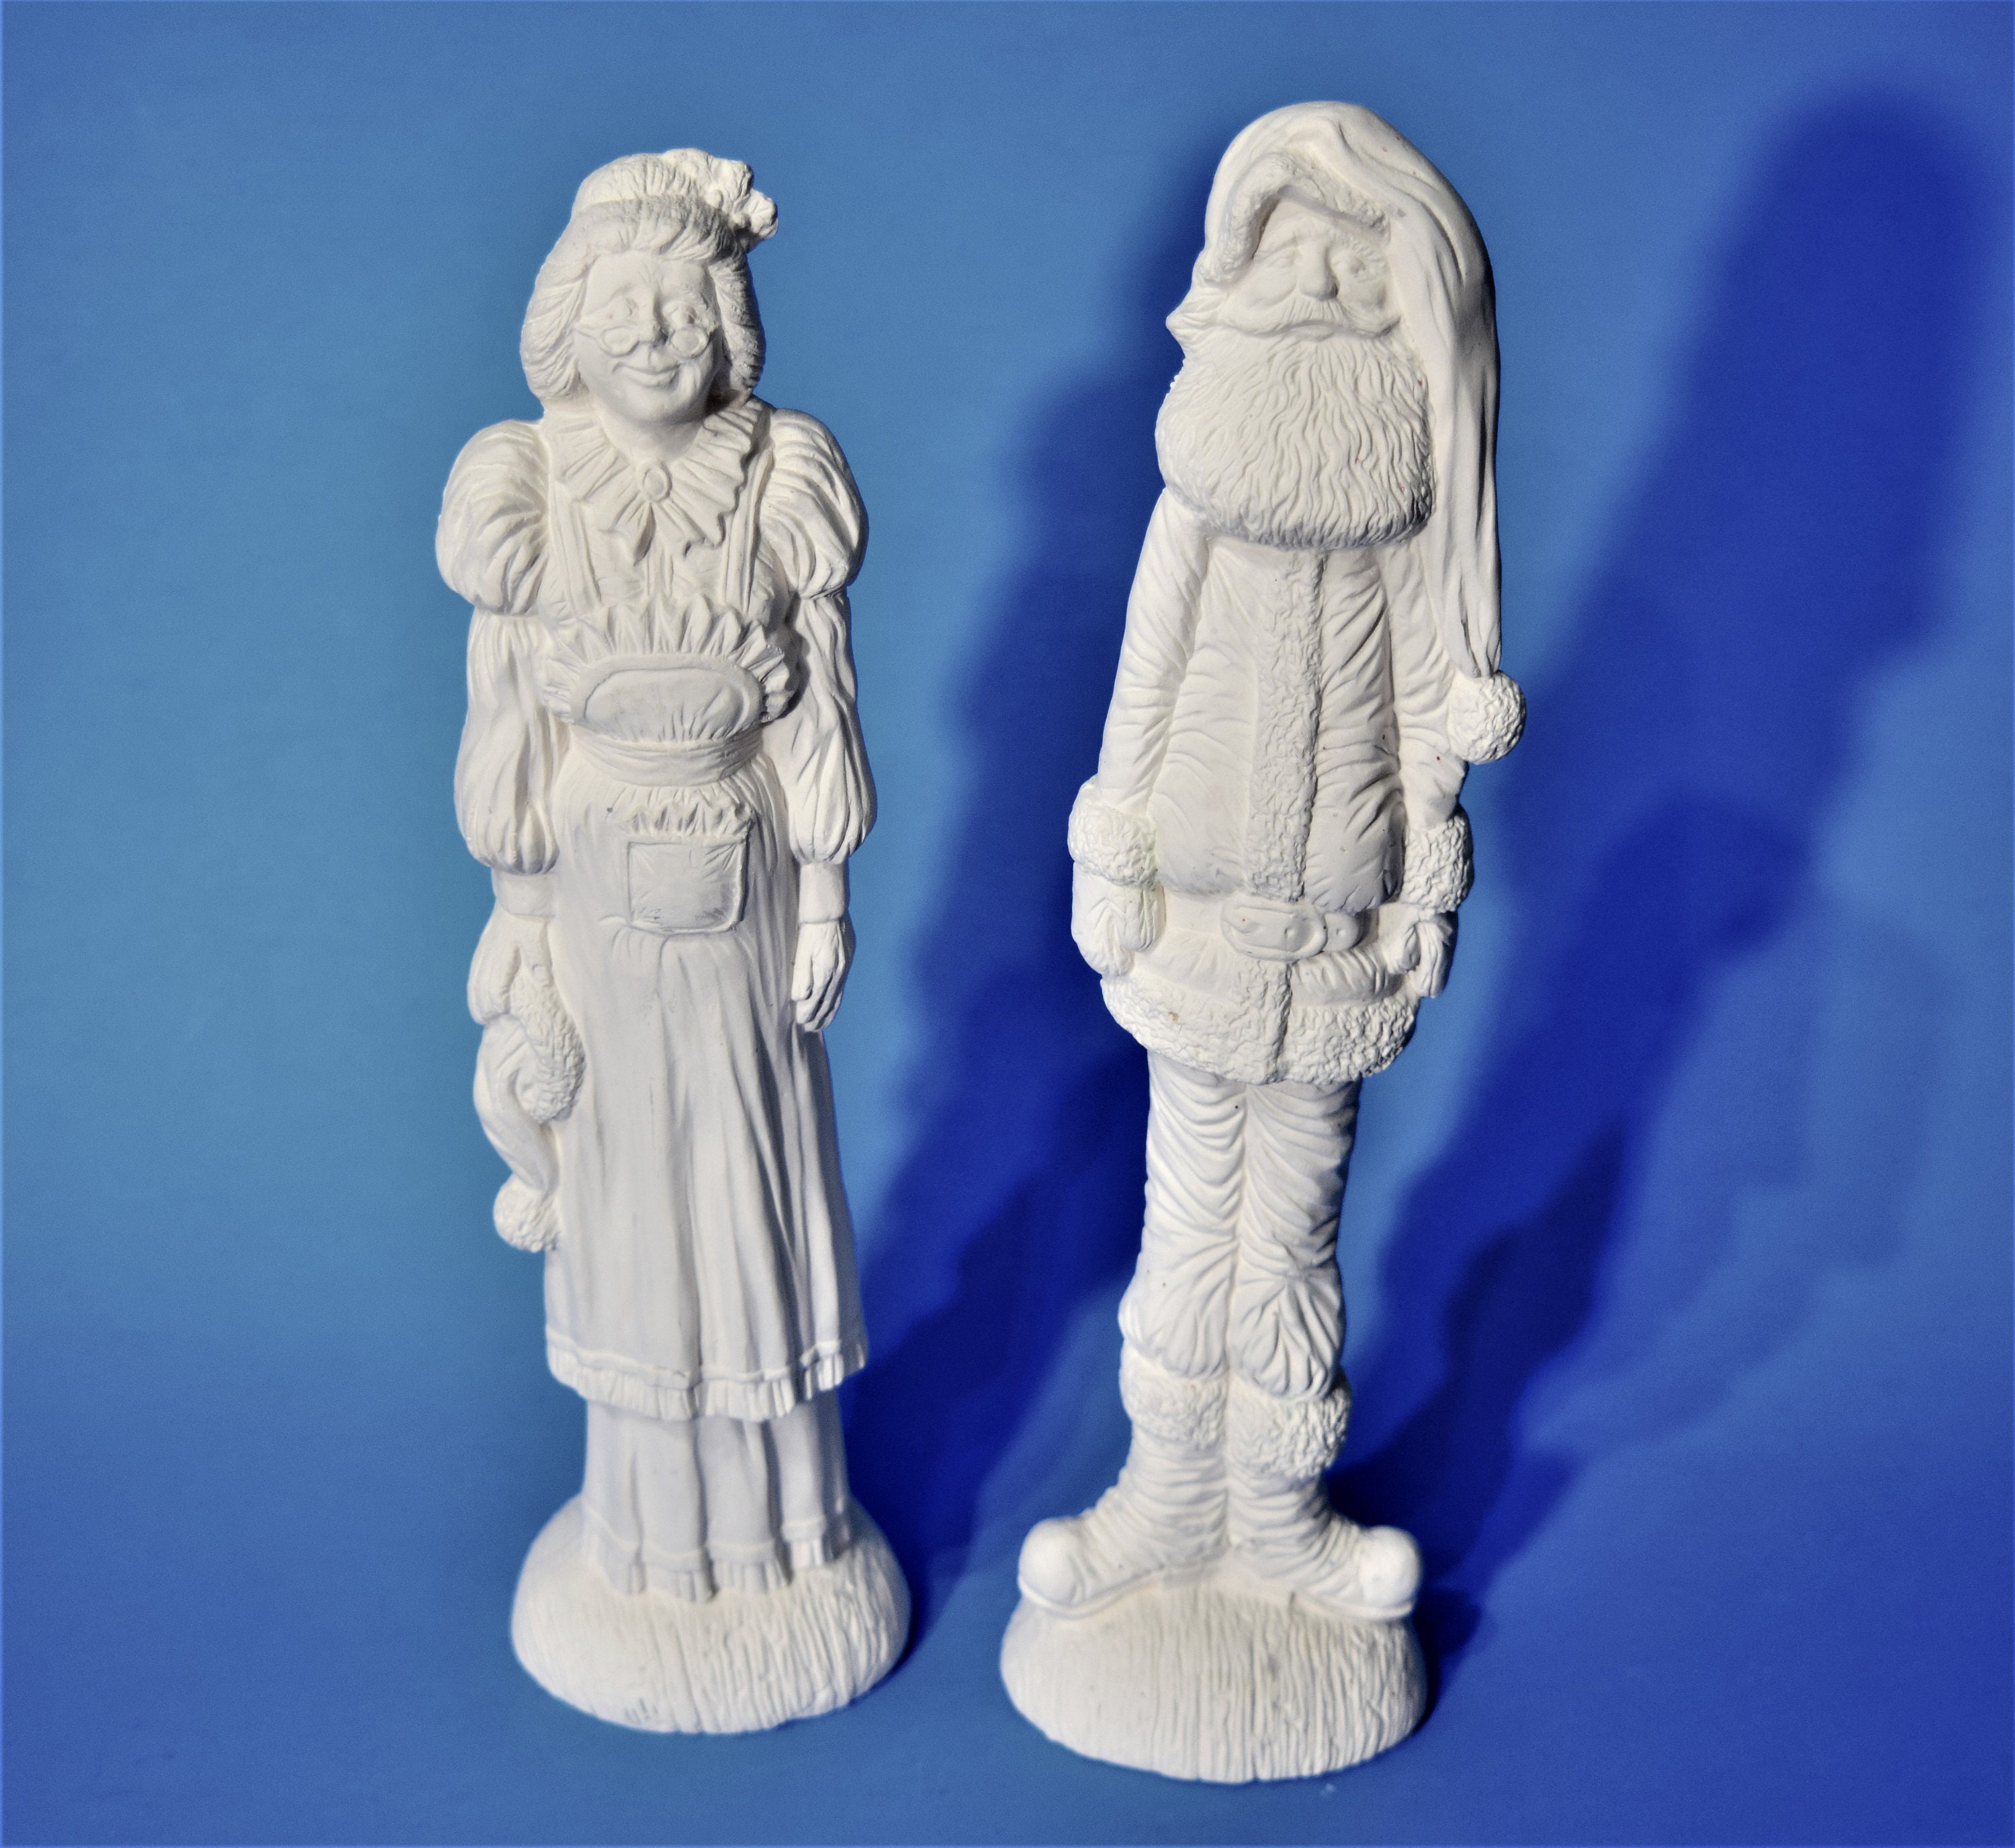 Mr and Mrs Claus Figurines Ready to Paint.u-paint Ceramic